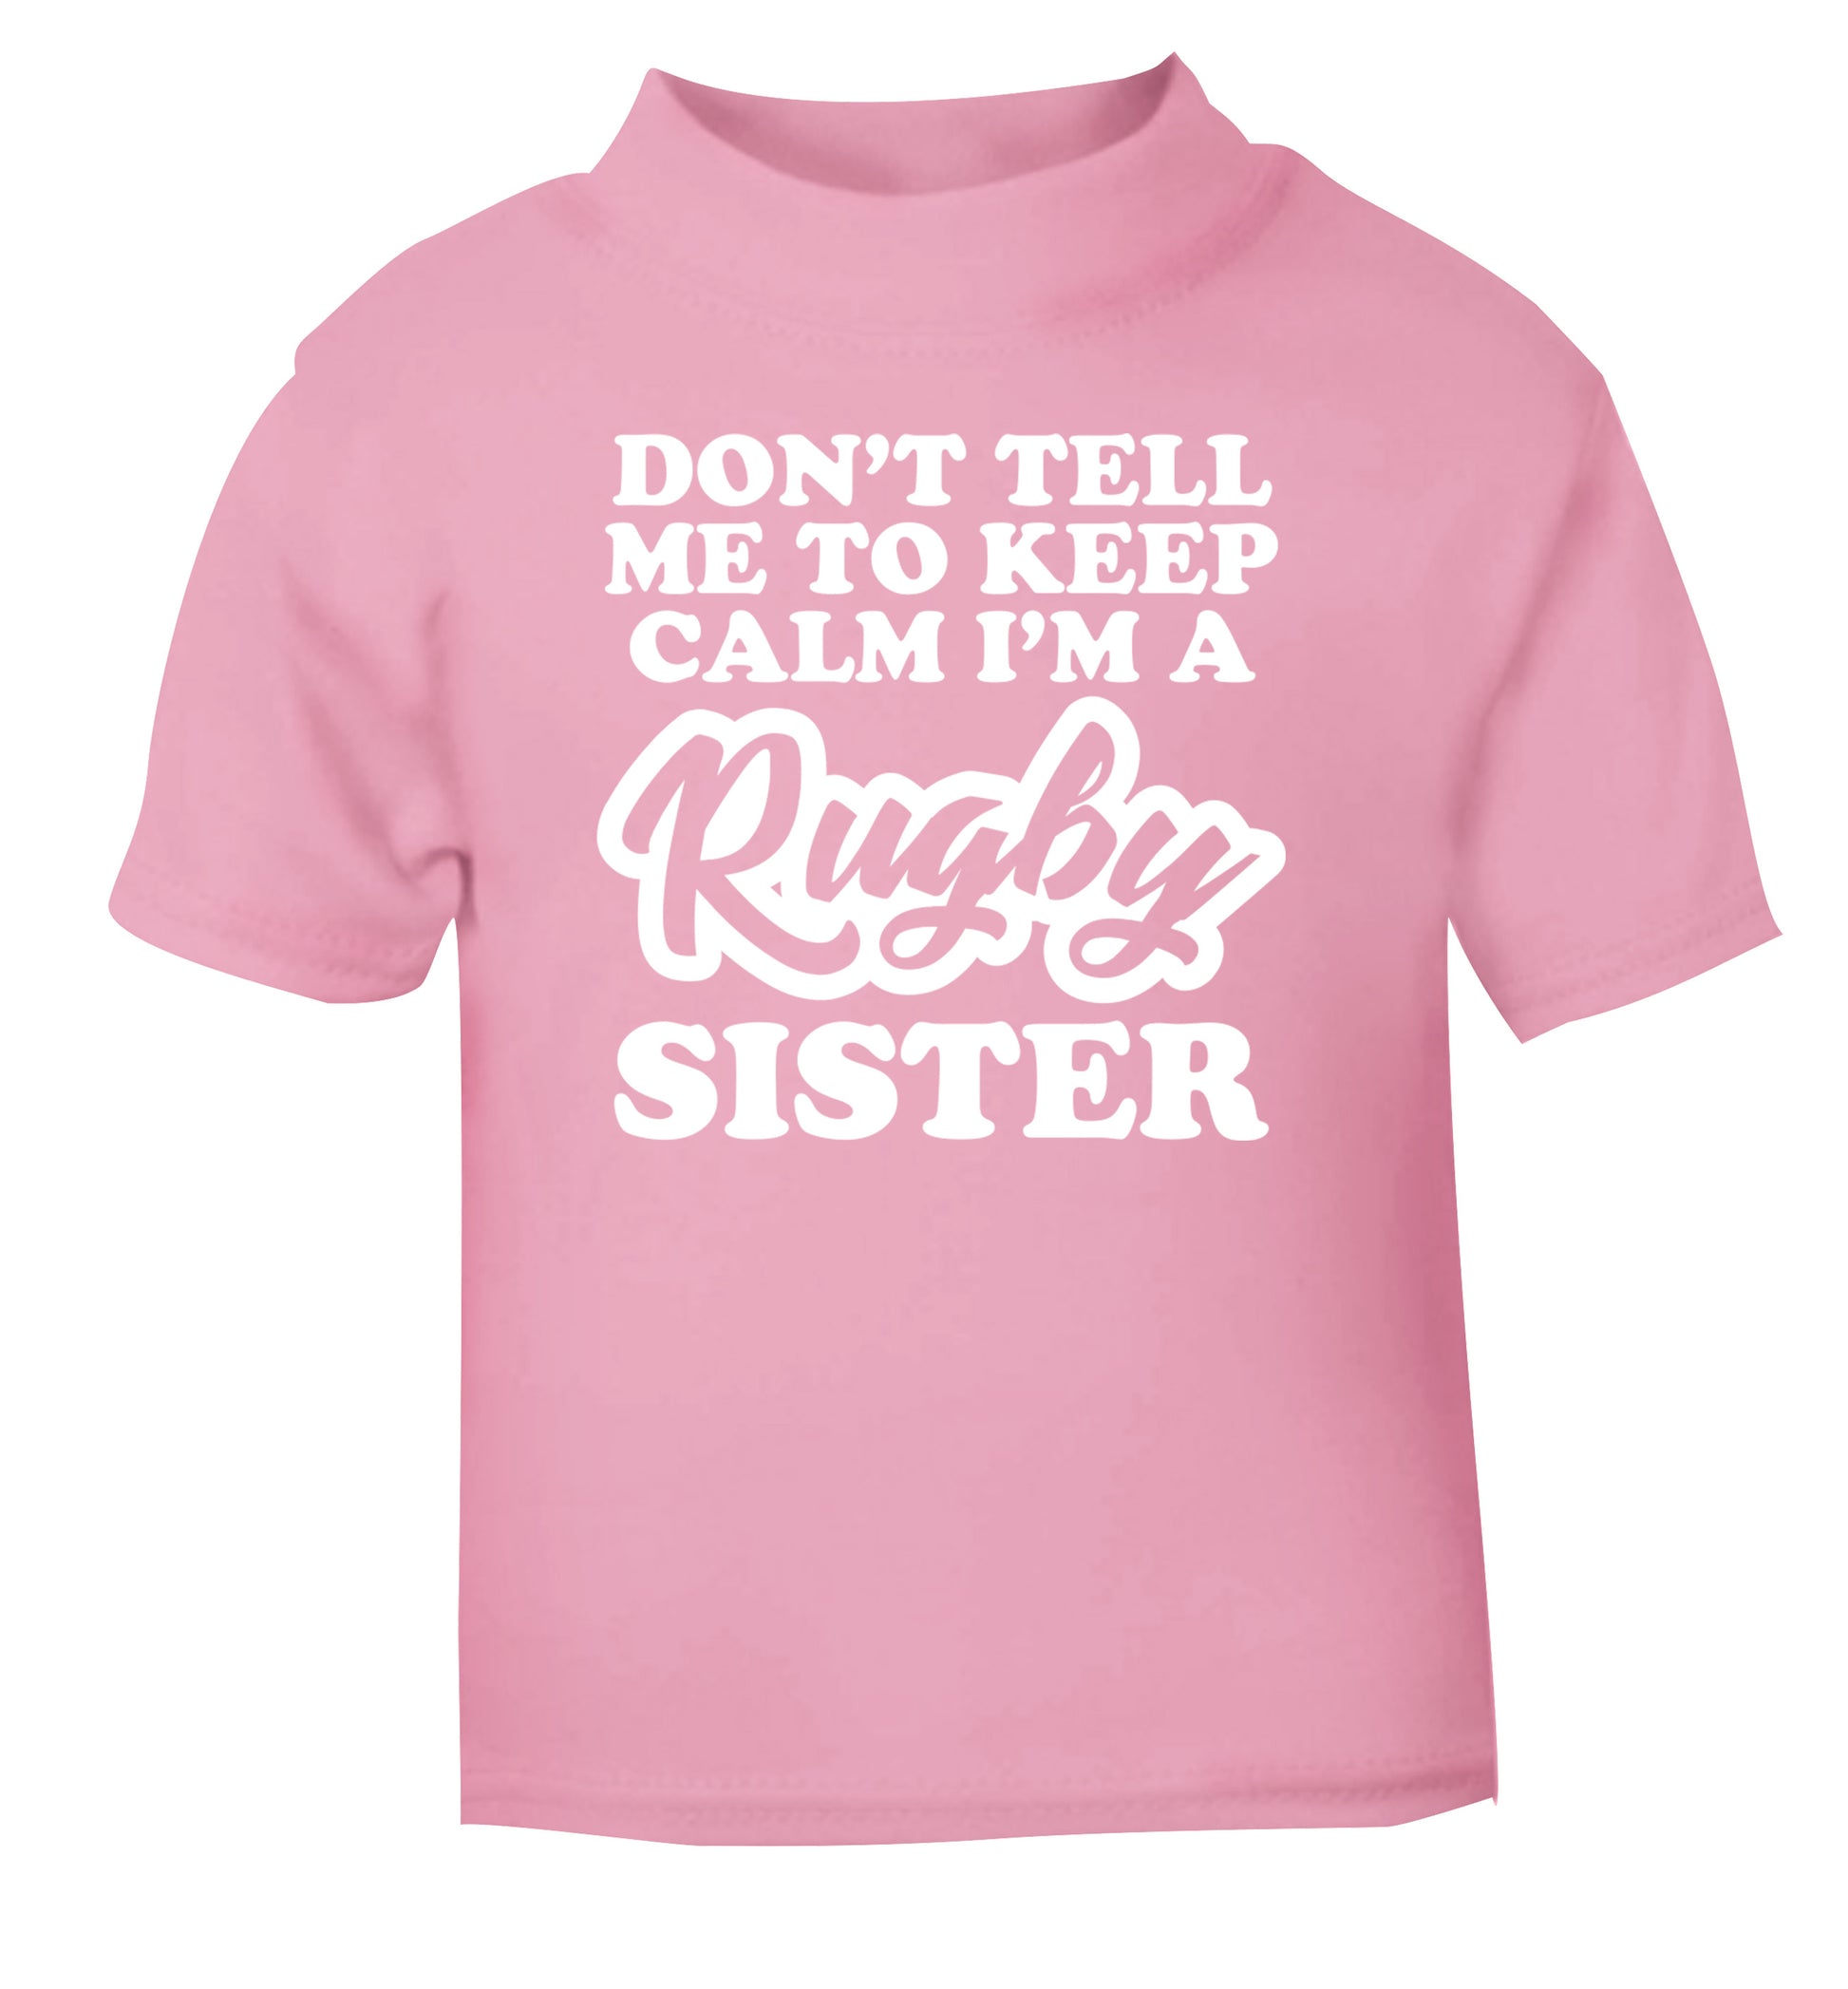 Don't tell me keep calm I'm a rugby sister light pink Baby Toddler Tshirt 2 Years